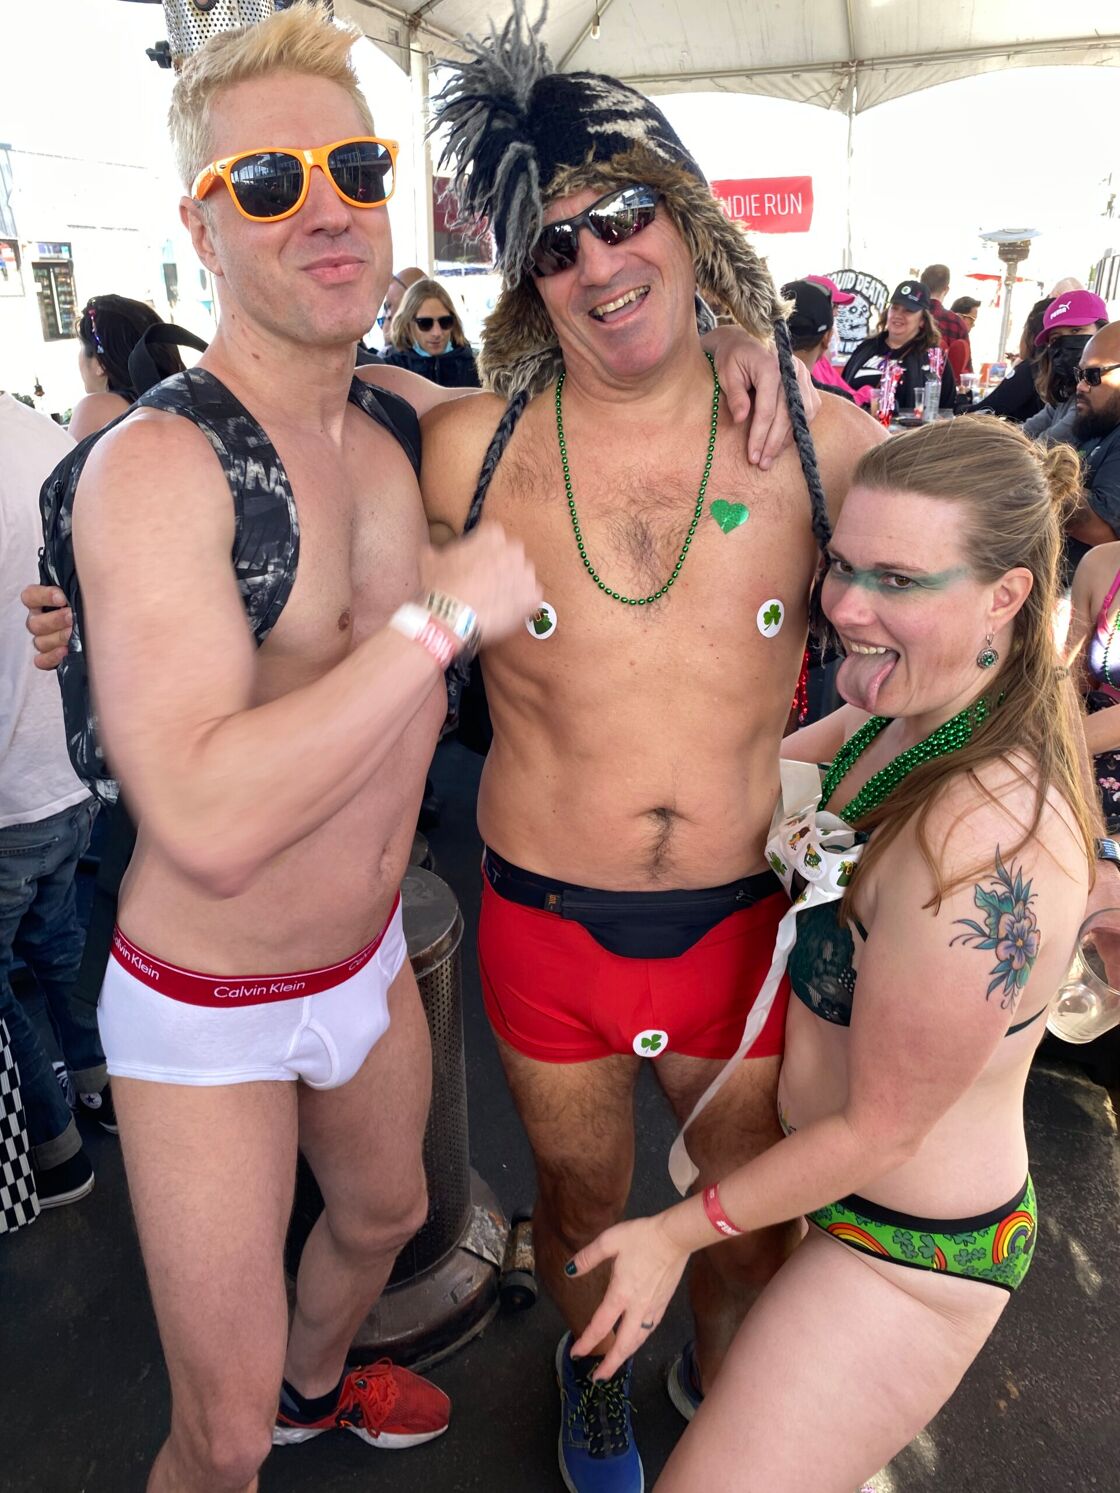 Both sides of the traditional "boxers or briefs" question were on display at the Cupid's Undie Run.